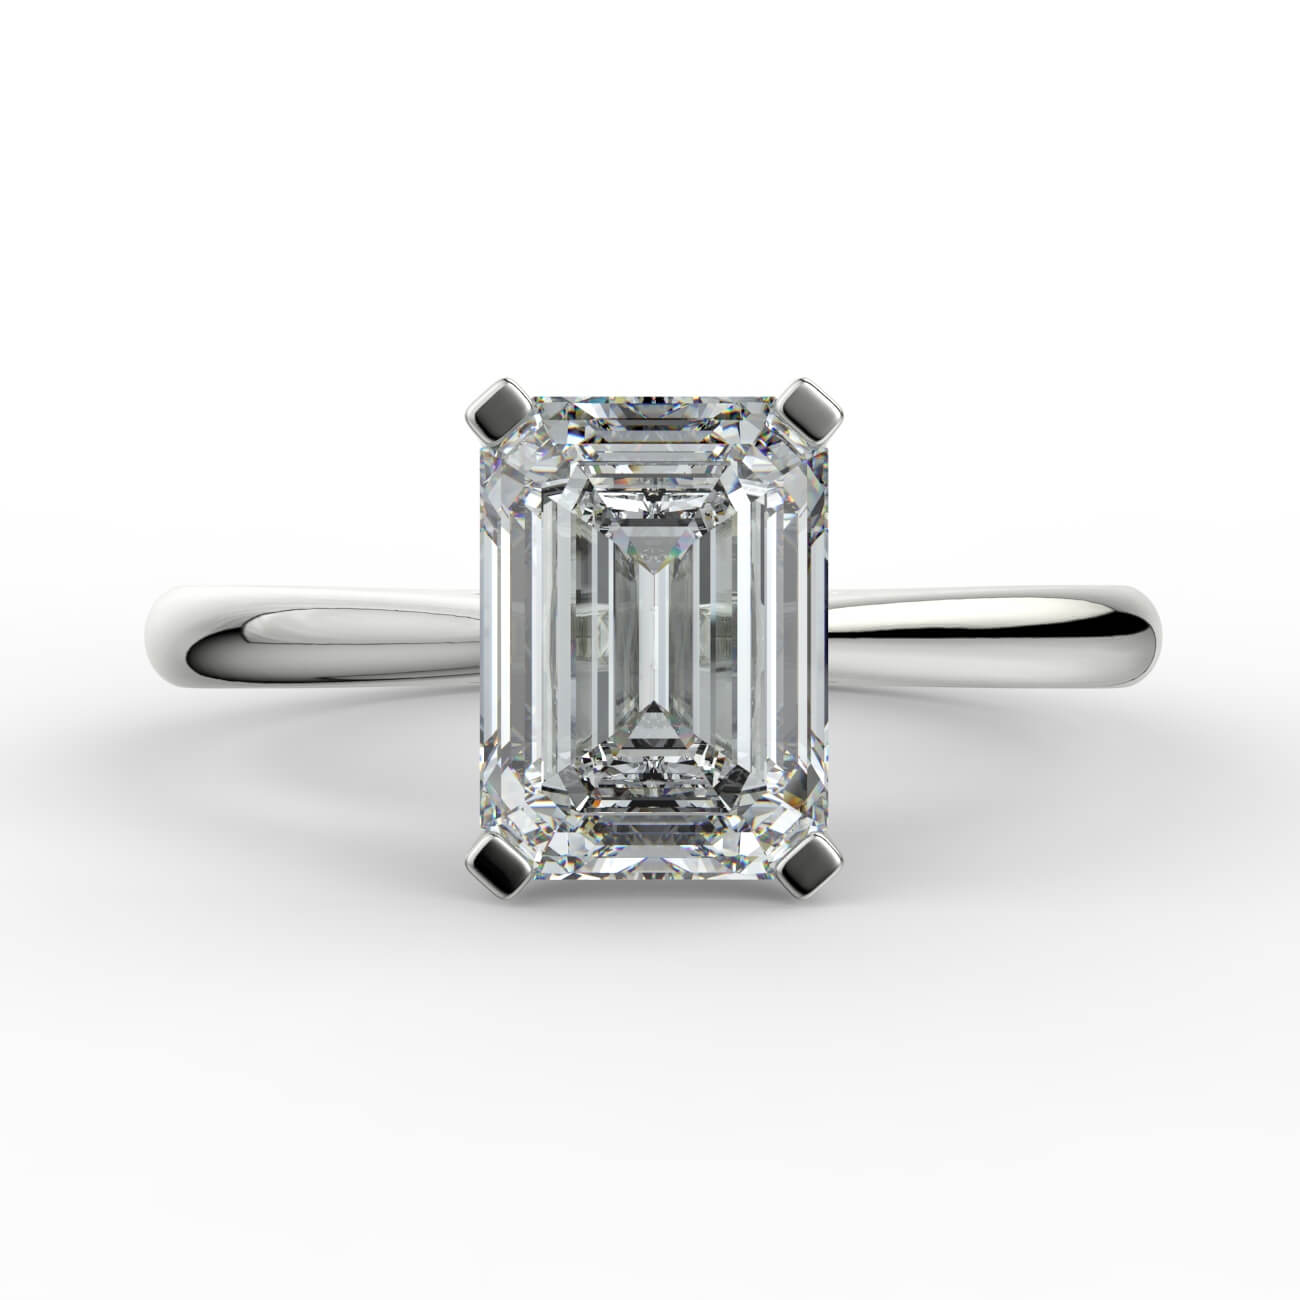 Emerald cut diamond cathedral engagement ring in white gold – Australian Diamond Network